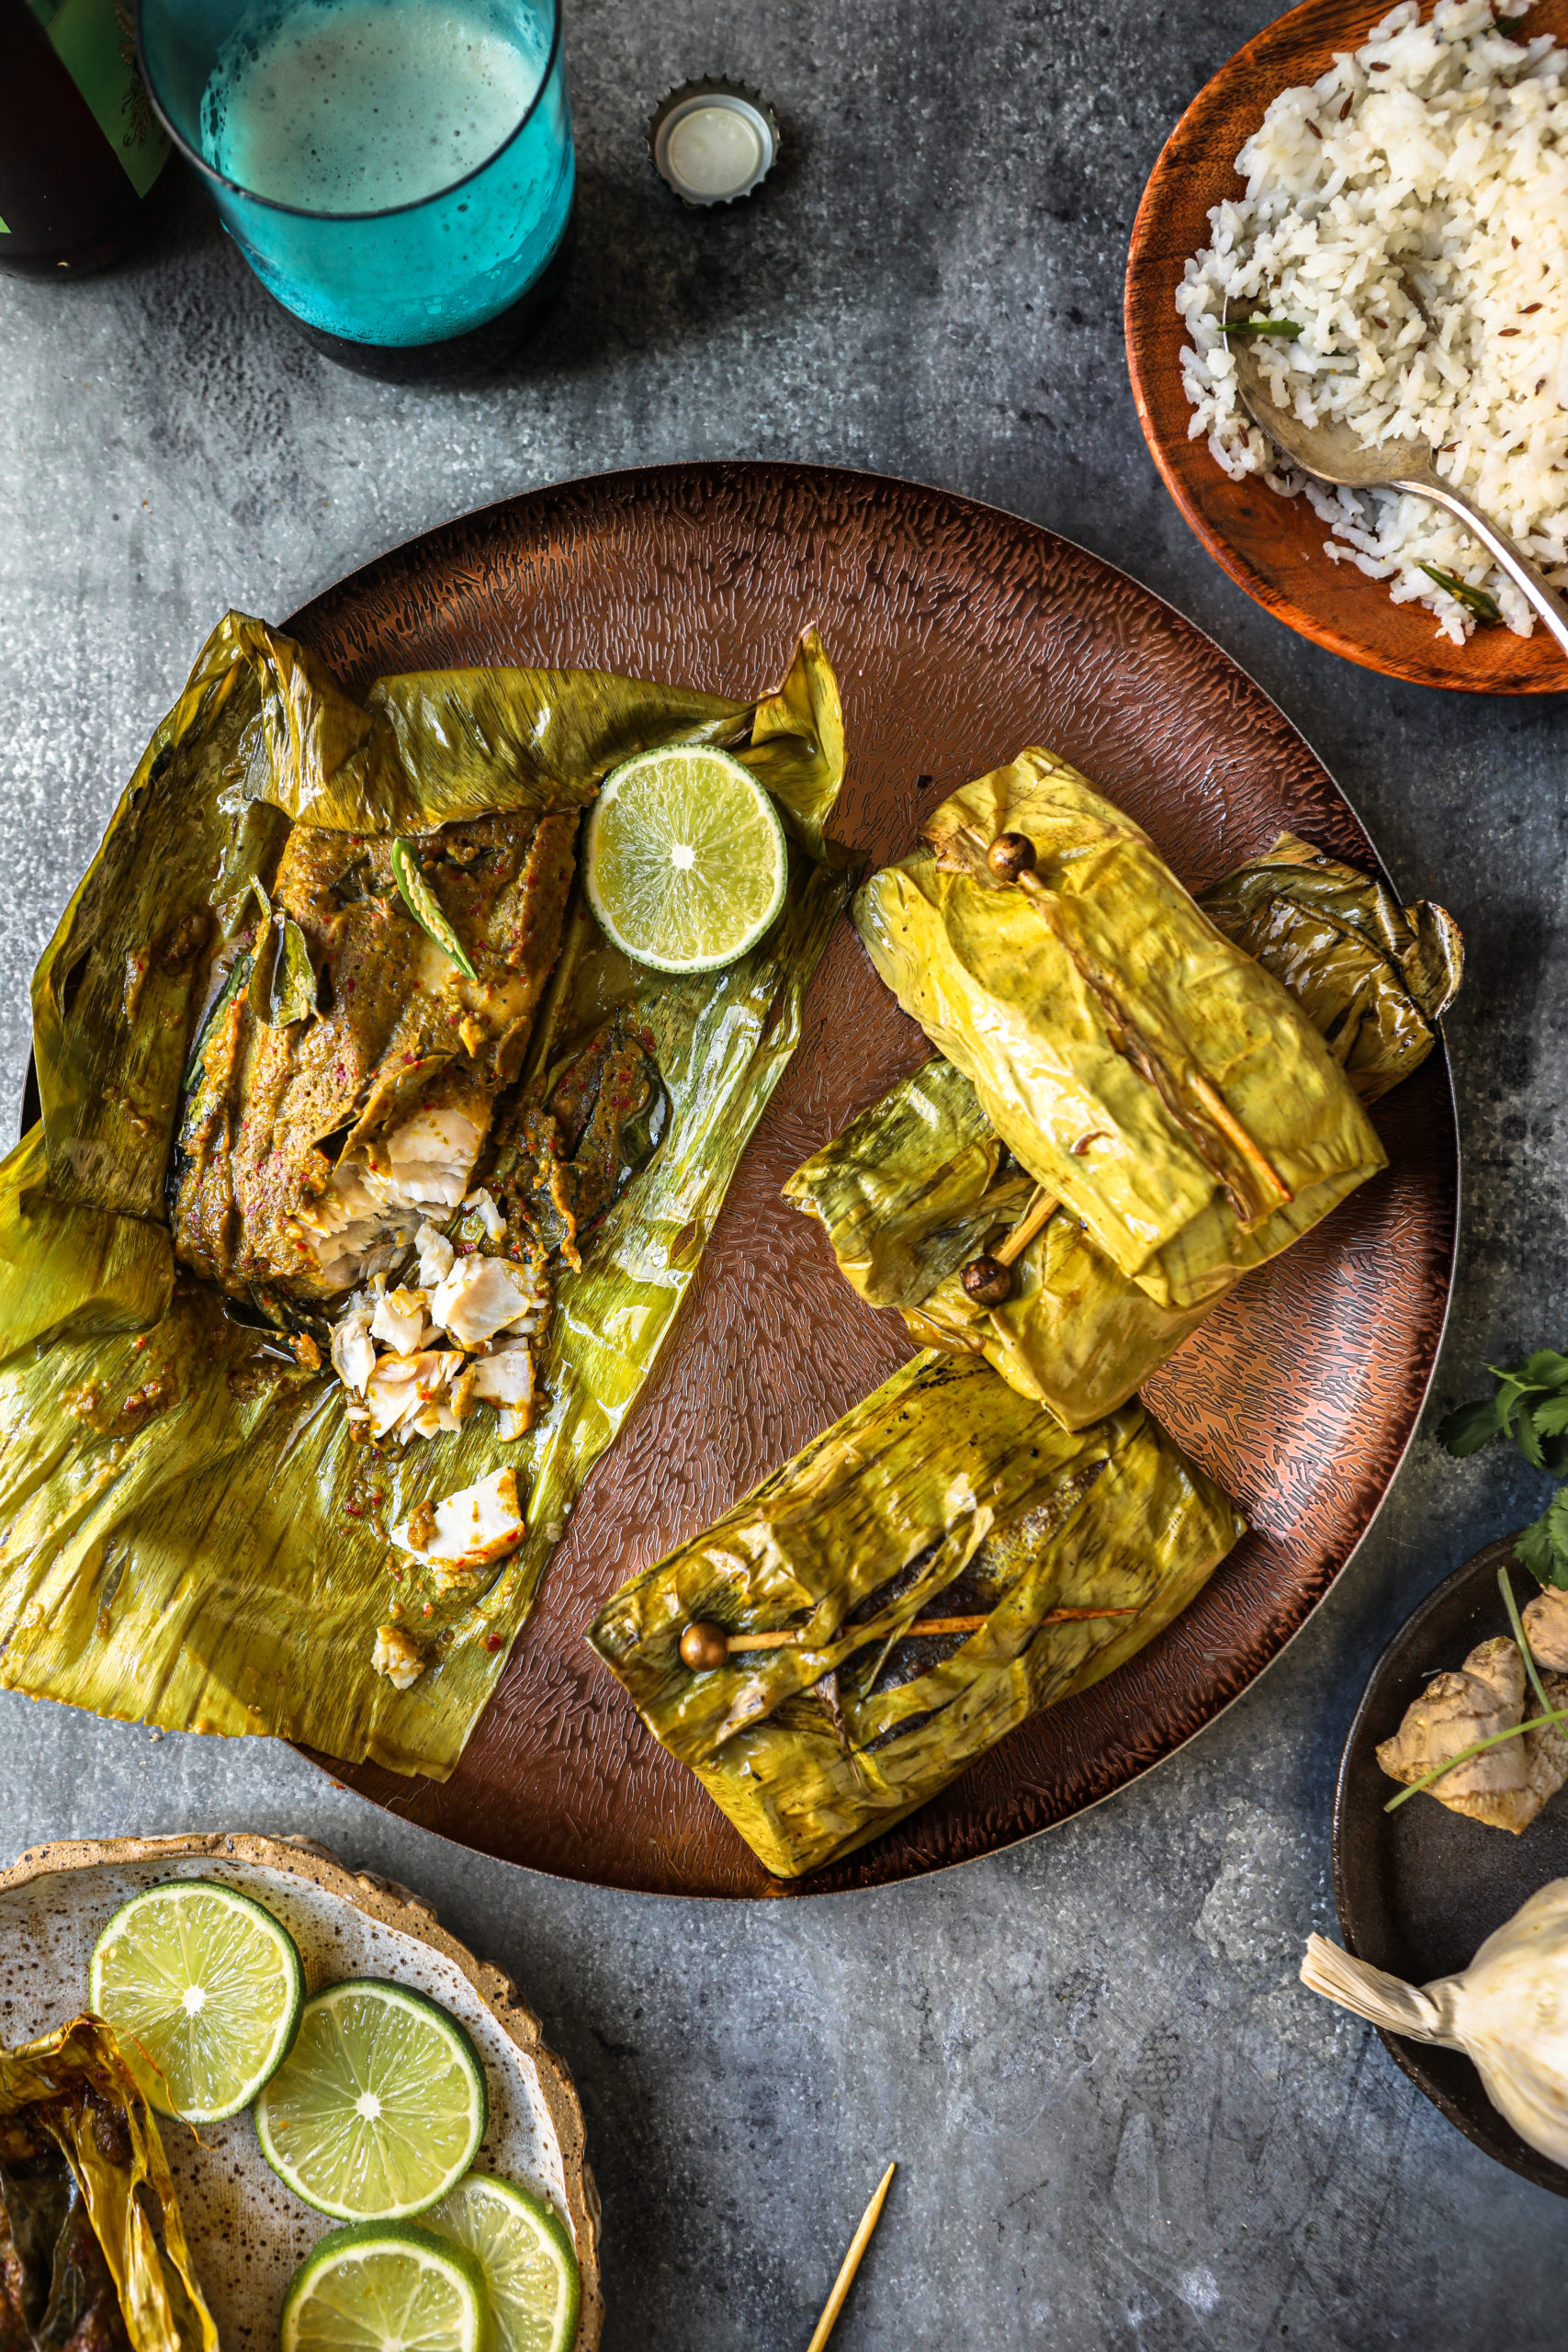 Banana Leaf–Wrapped Green Curry Fish Recipe